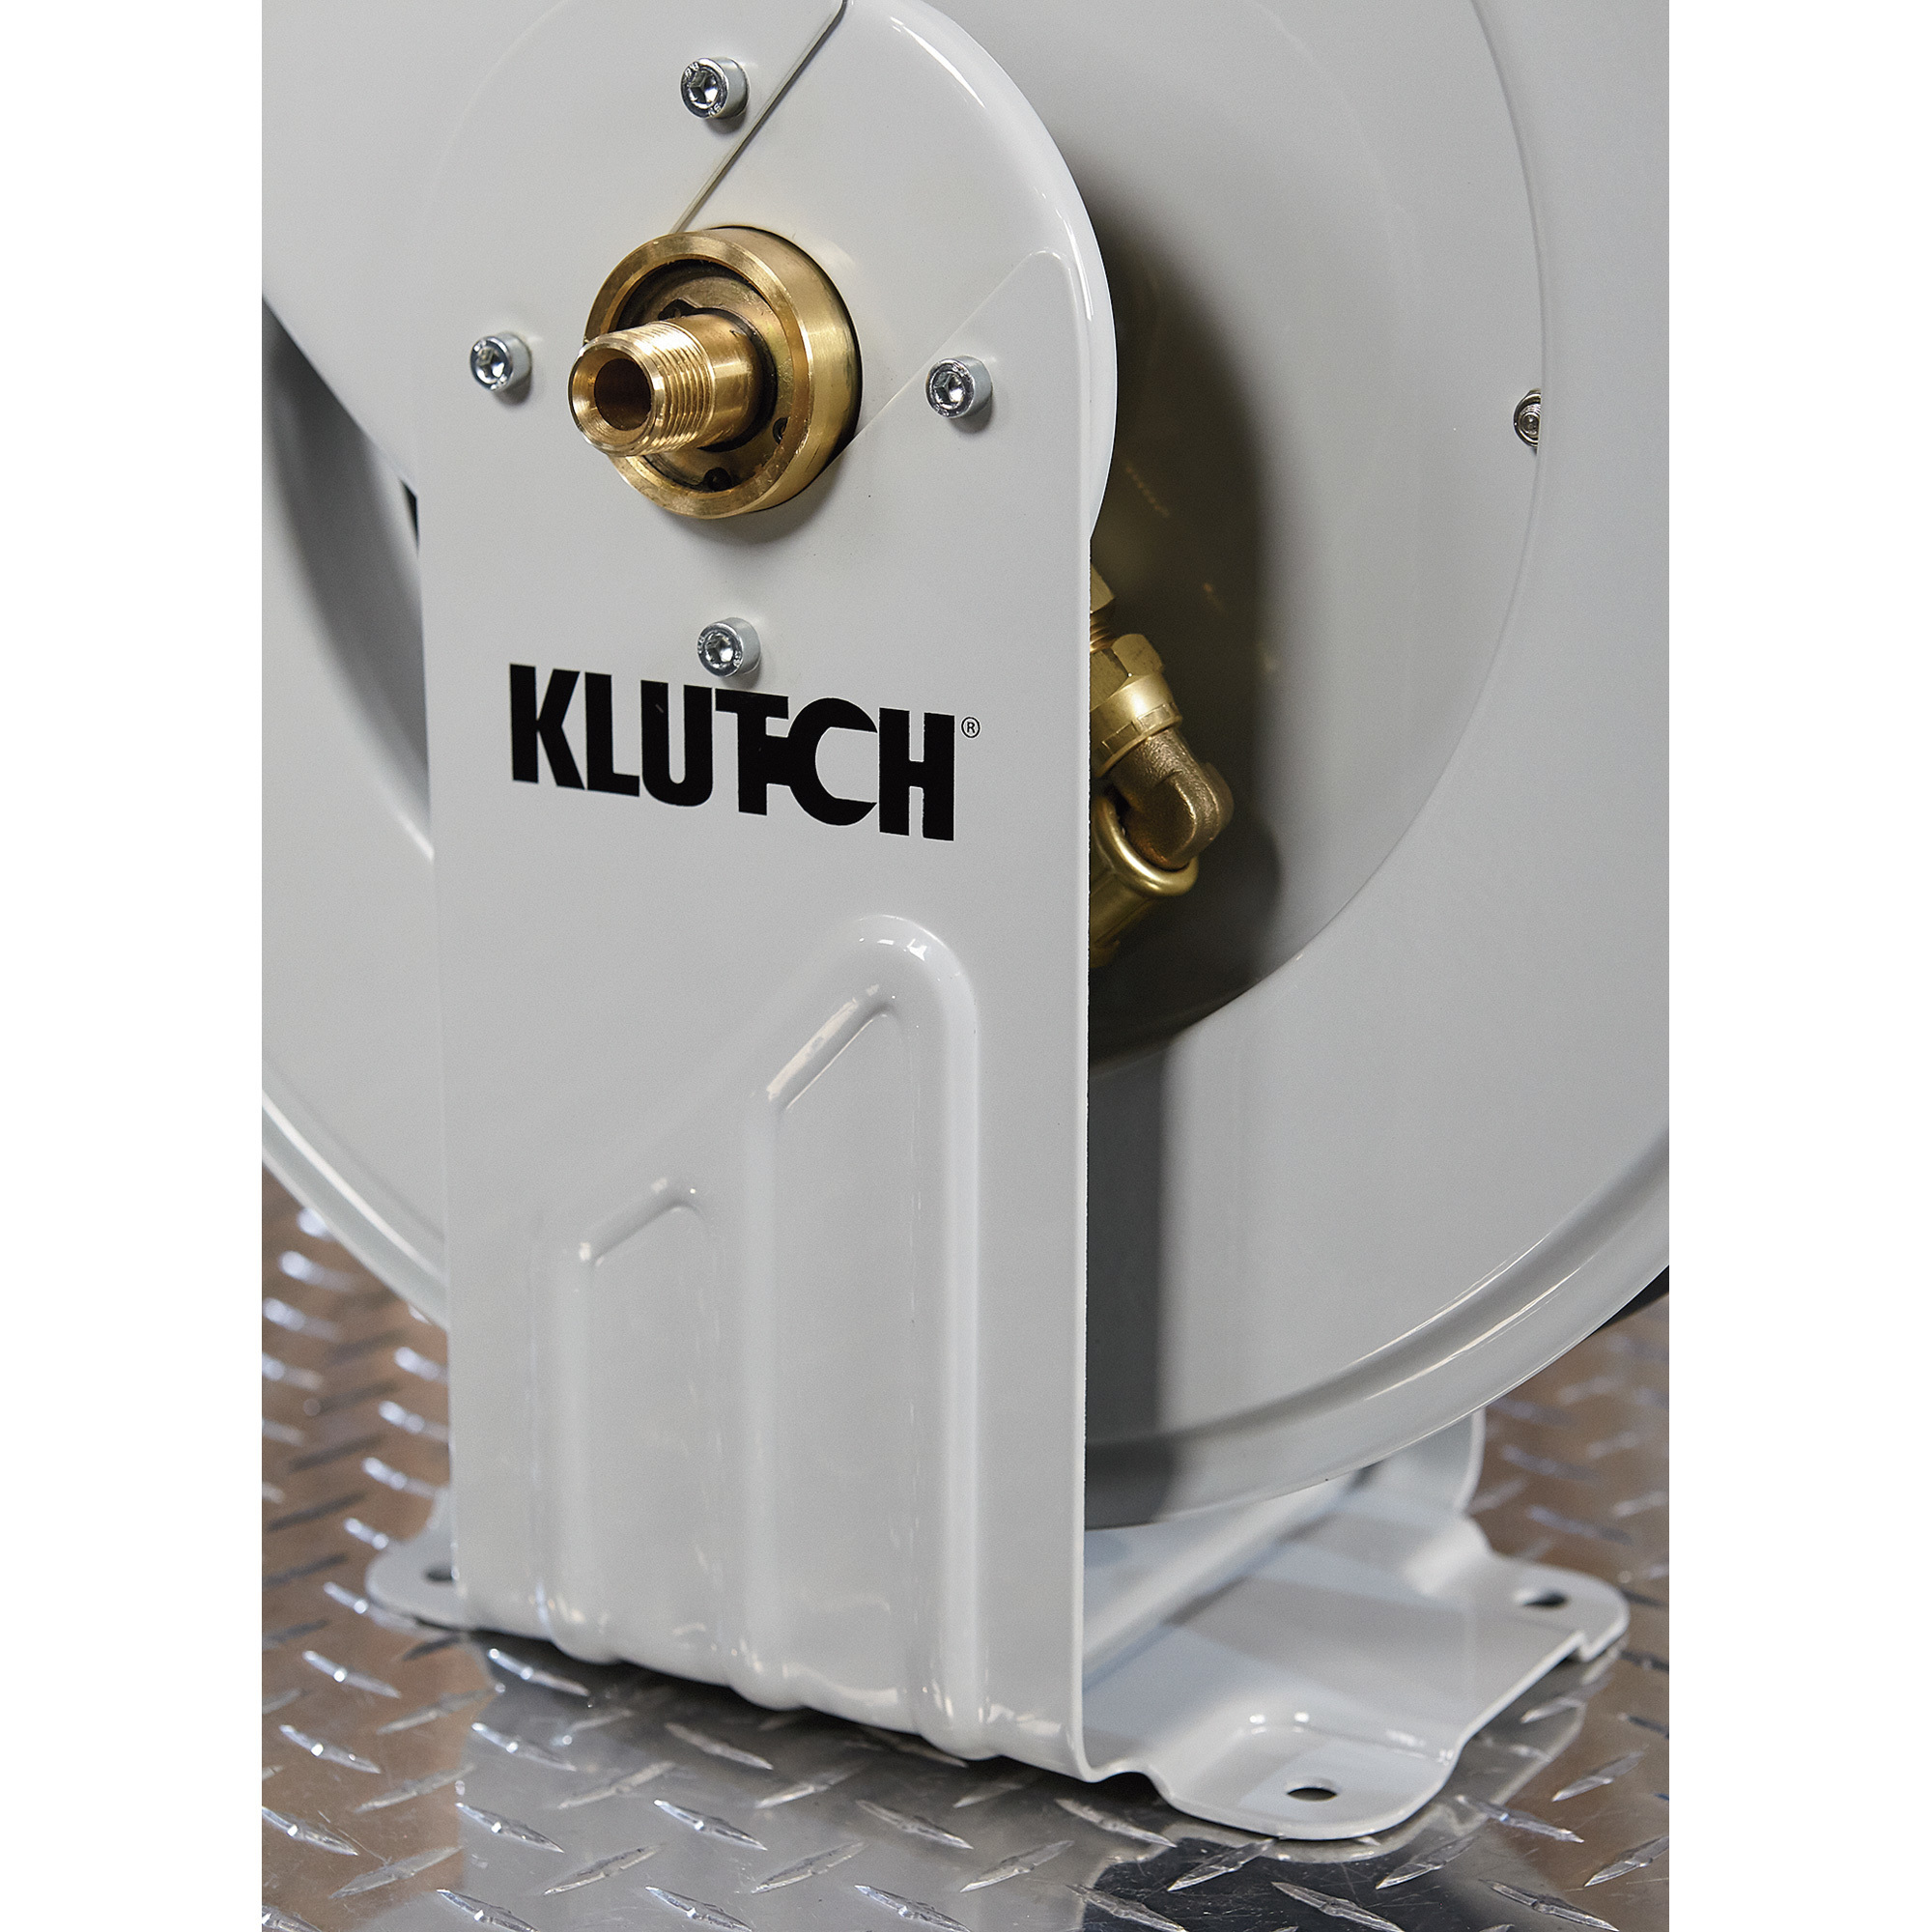 Klutch Auto Rewind Air Hose Reel, With 1/2in. x 50ft. NRB Rubber Hose, Max.  300 PSI